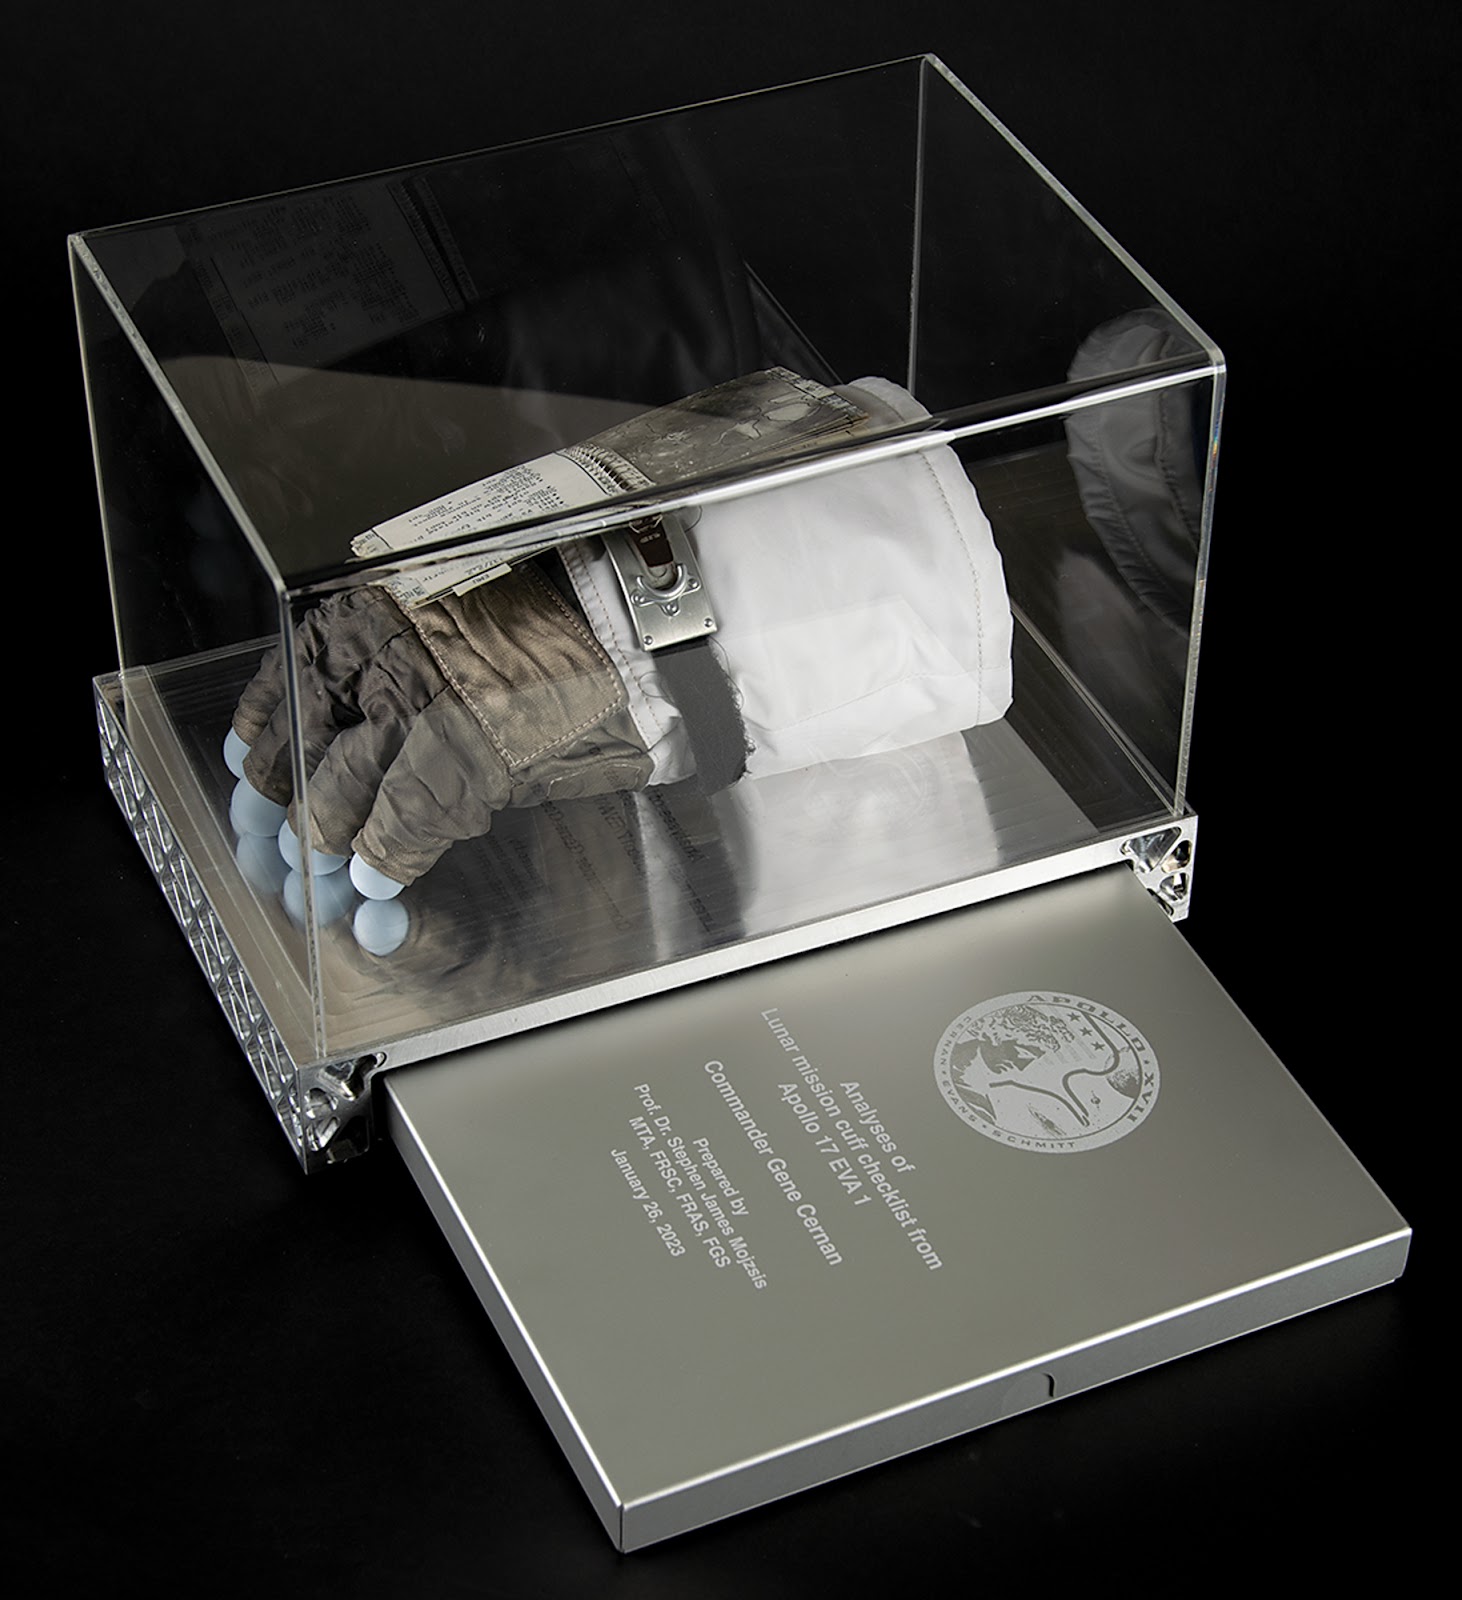 The cuff checklist displayed with an aluminum case engraved with the Apollo 17 mission insignia. Inside of this case are documents including Gene Cernan’s provenance document and a report on the lunar dust by Dr. Stephen J. Mojzsis. 